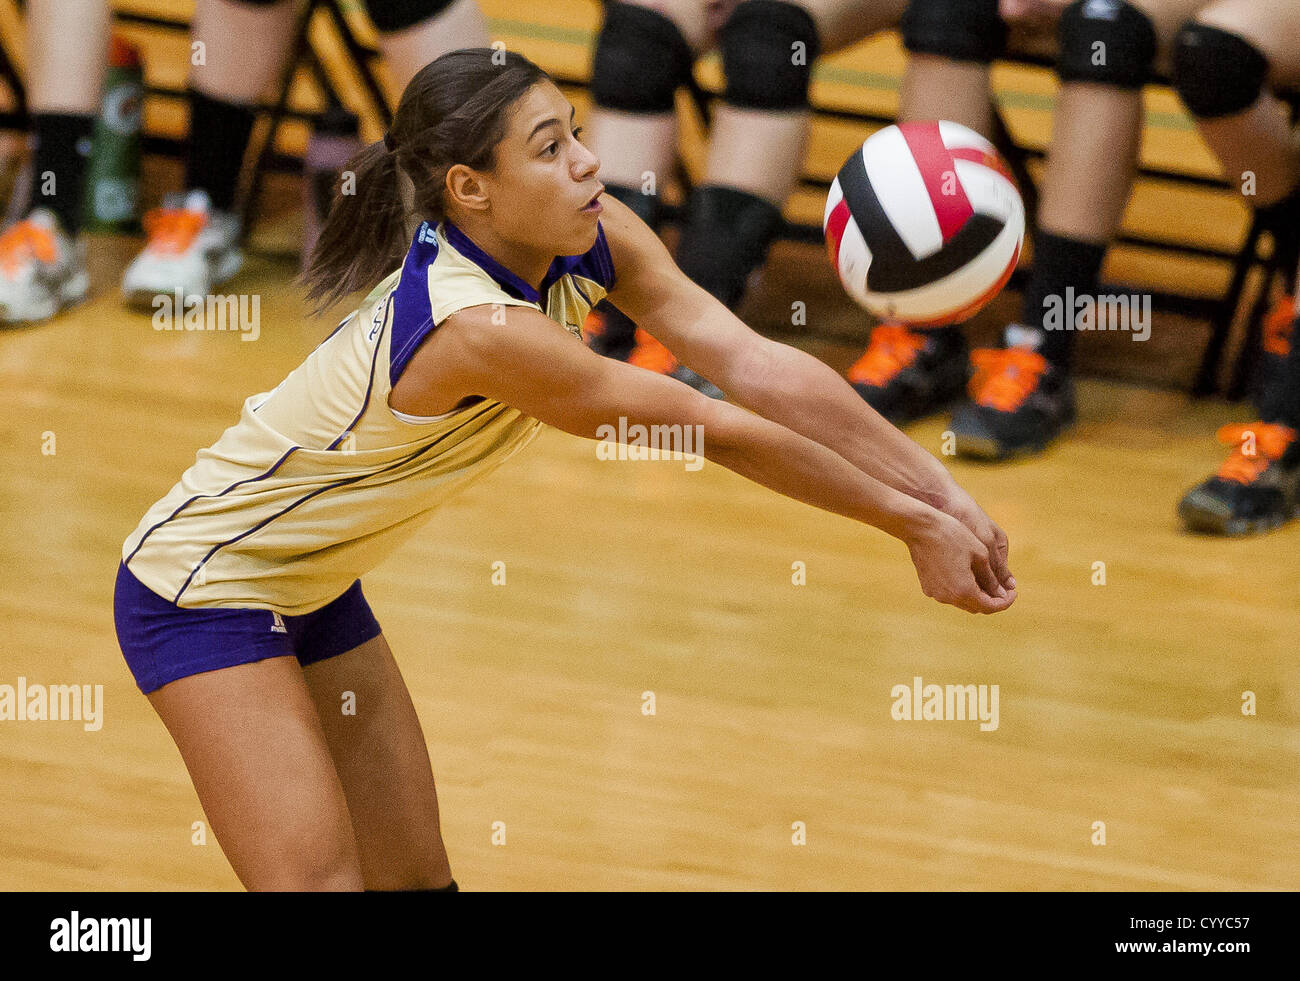 Nov. 12, 2012 - College Park, Maryland, U.S. - Smithsburg's Marissa Danglert hits the ball during the Sparrows Point High School versus Smithsburg High School match in the Semifinals of the Maryland State Volleyball 1A Championship at Ritchie Coliseum in College Park, Maryland on November 12, 2012. Smithsburg defeated Sparrows Point in straight sets 25-10, 25-12, 25-10 to advance to the State Finals. (Credit Image: © Scott Serio/Eclipse/ZUMAPRESS.com) Stock Photo